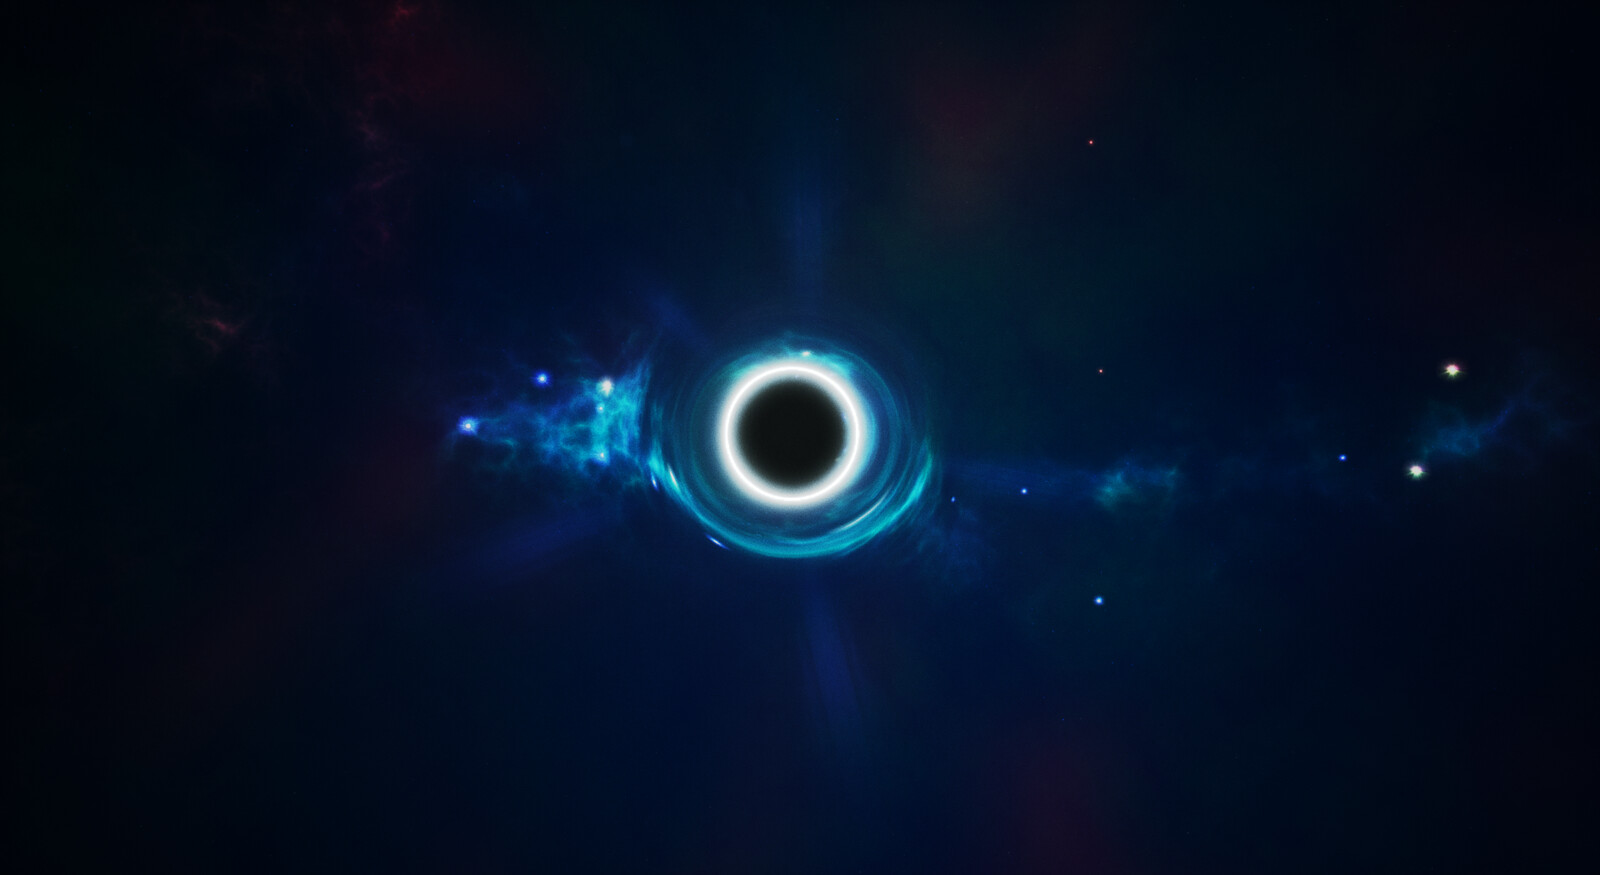 Black hole with an accretion disk.